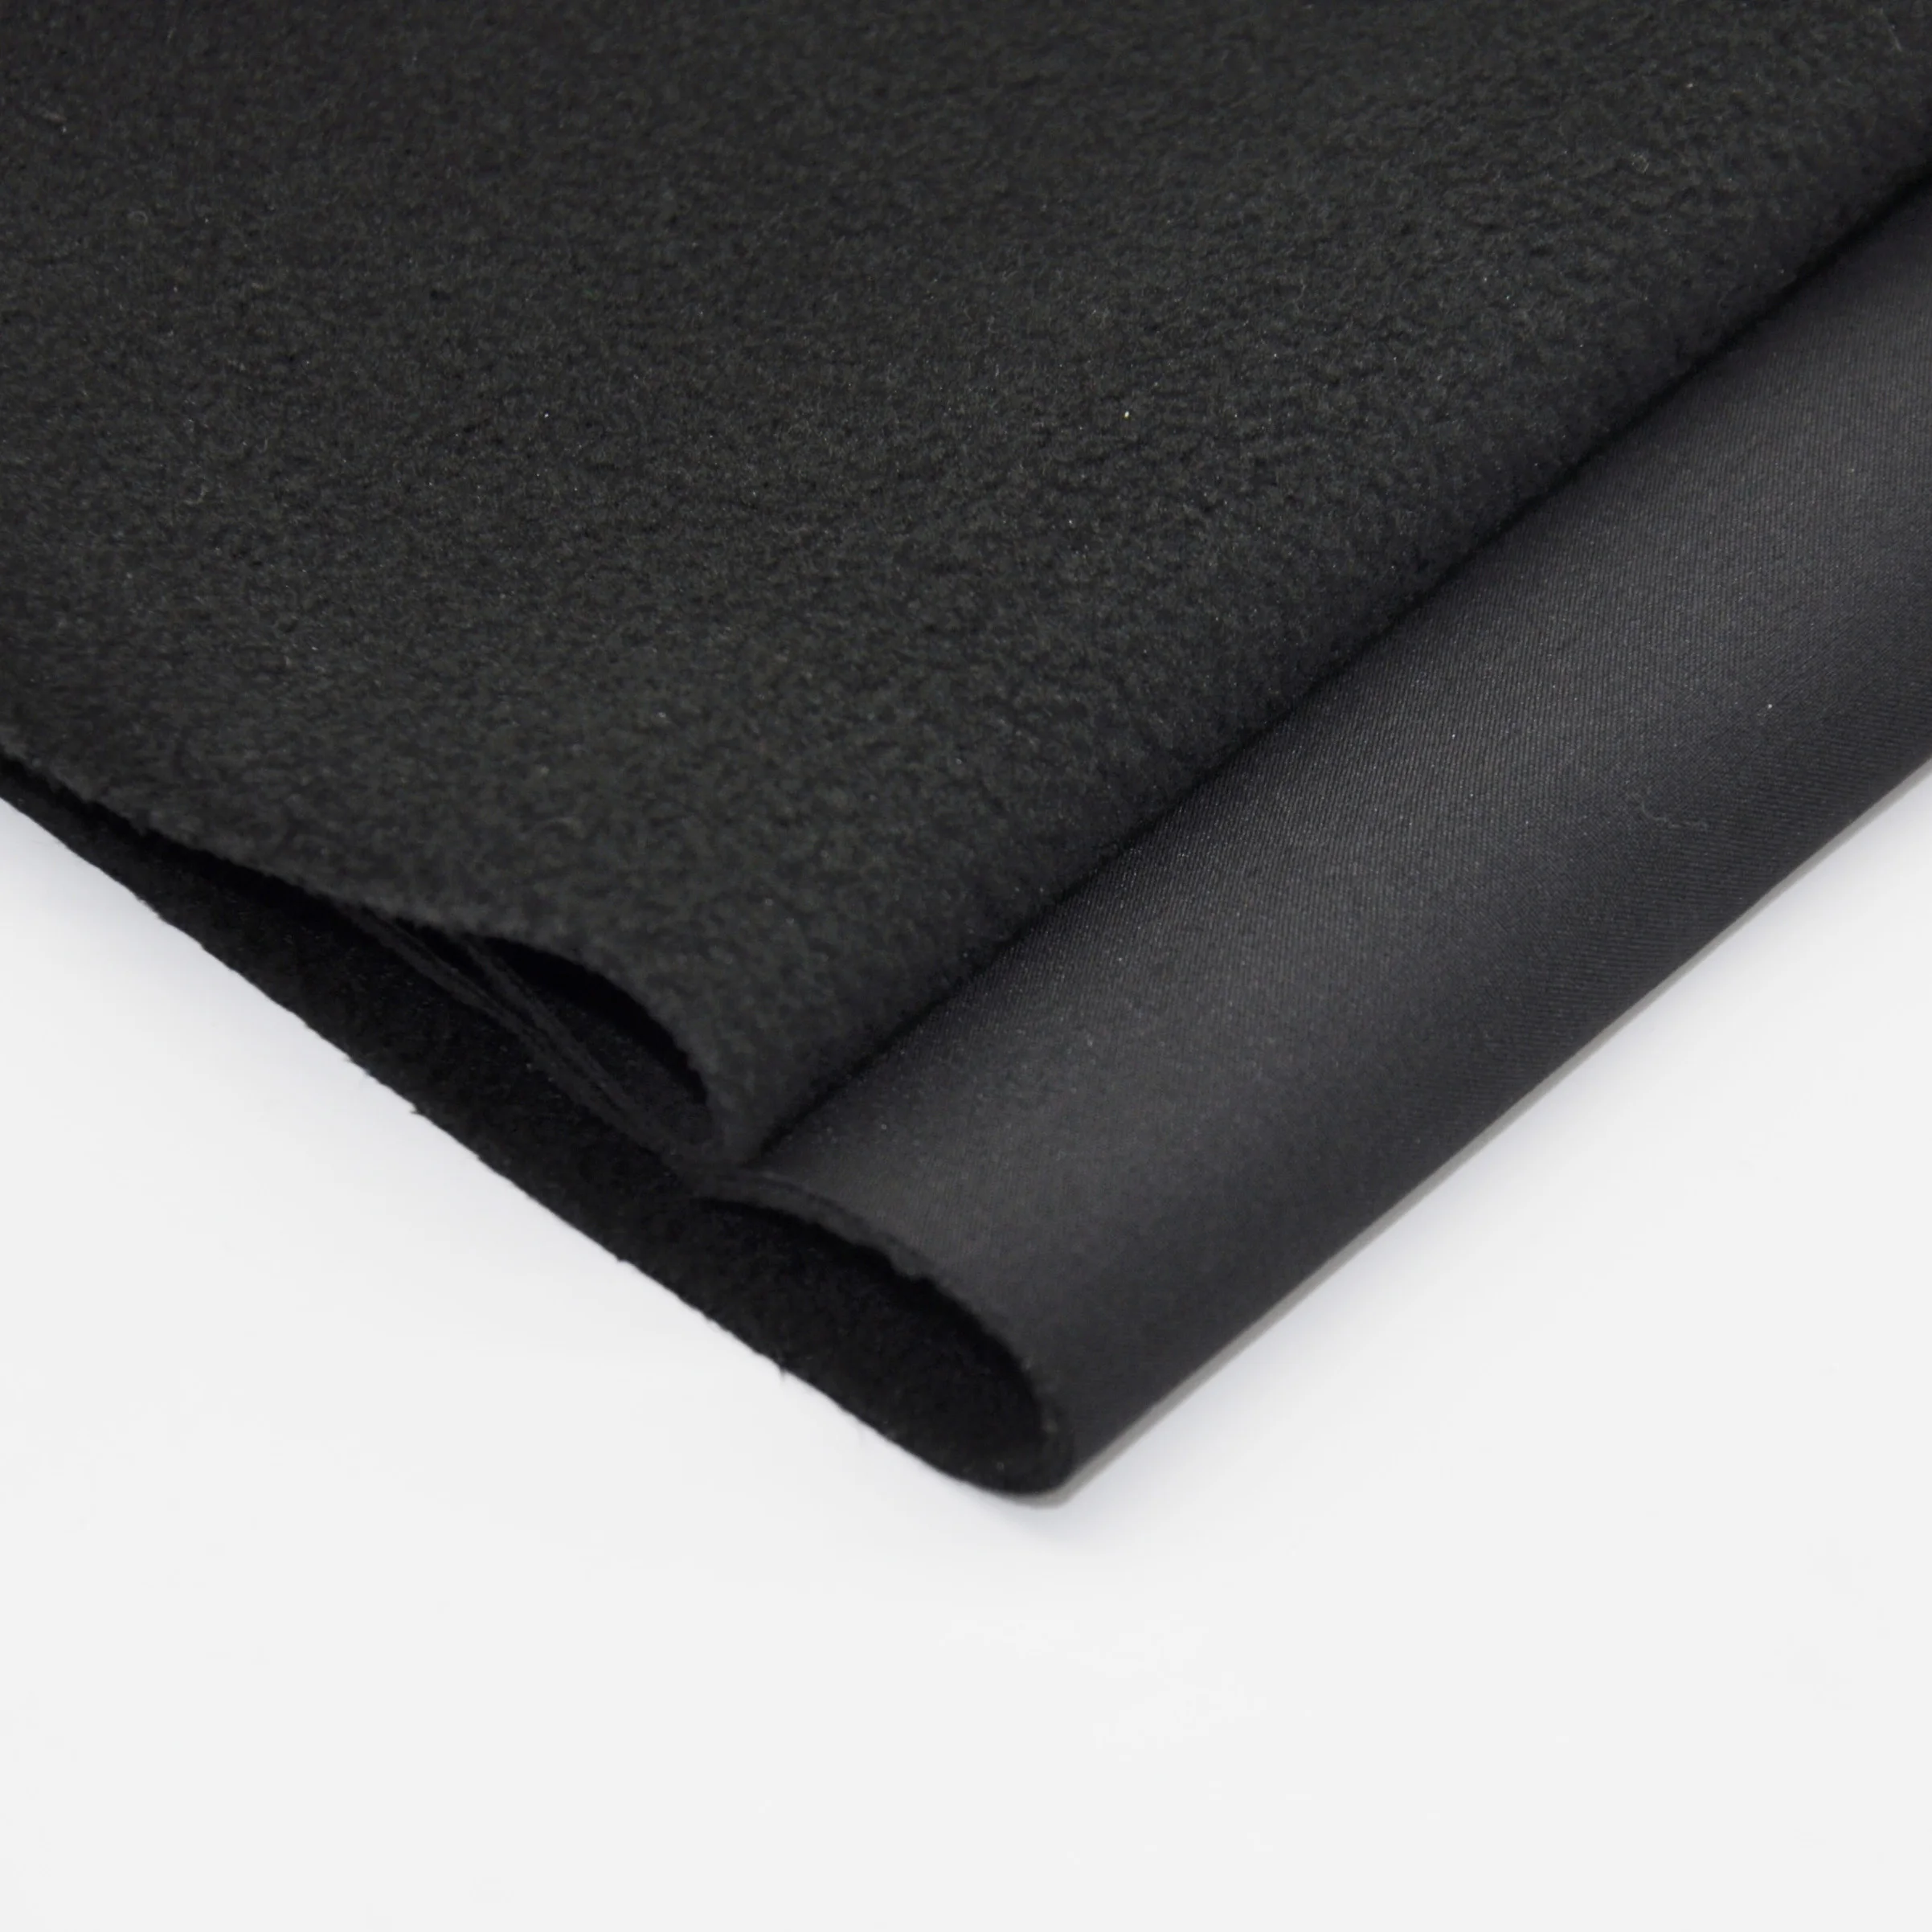 
softshell fabric 4 way stretch polyester spandex four way material 